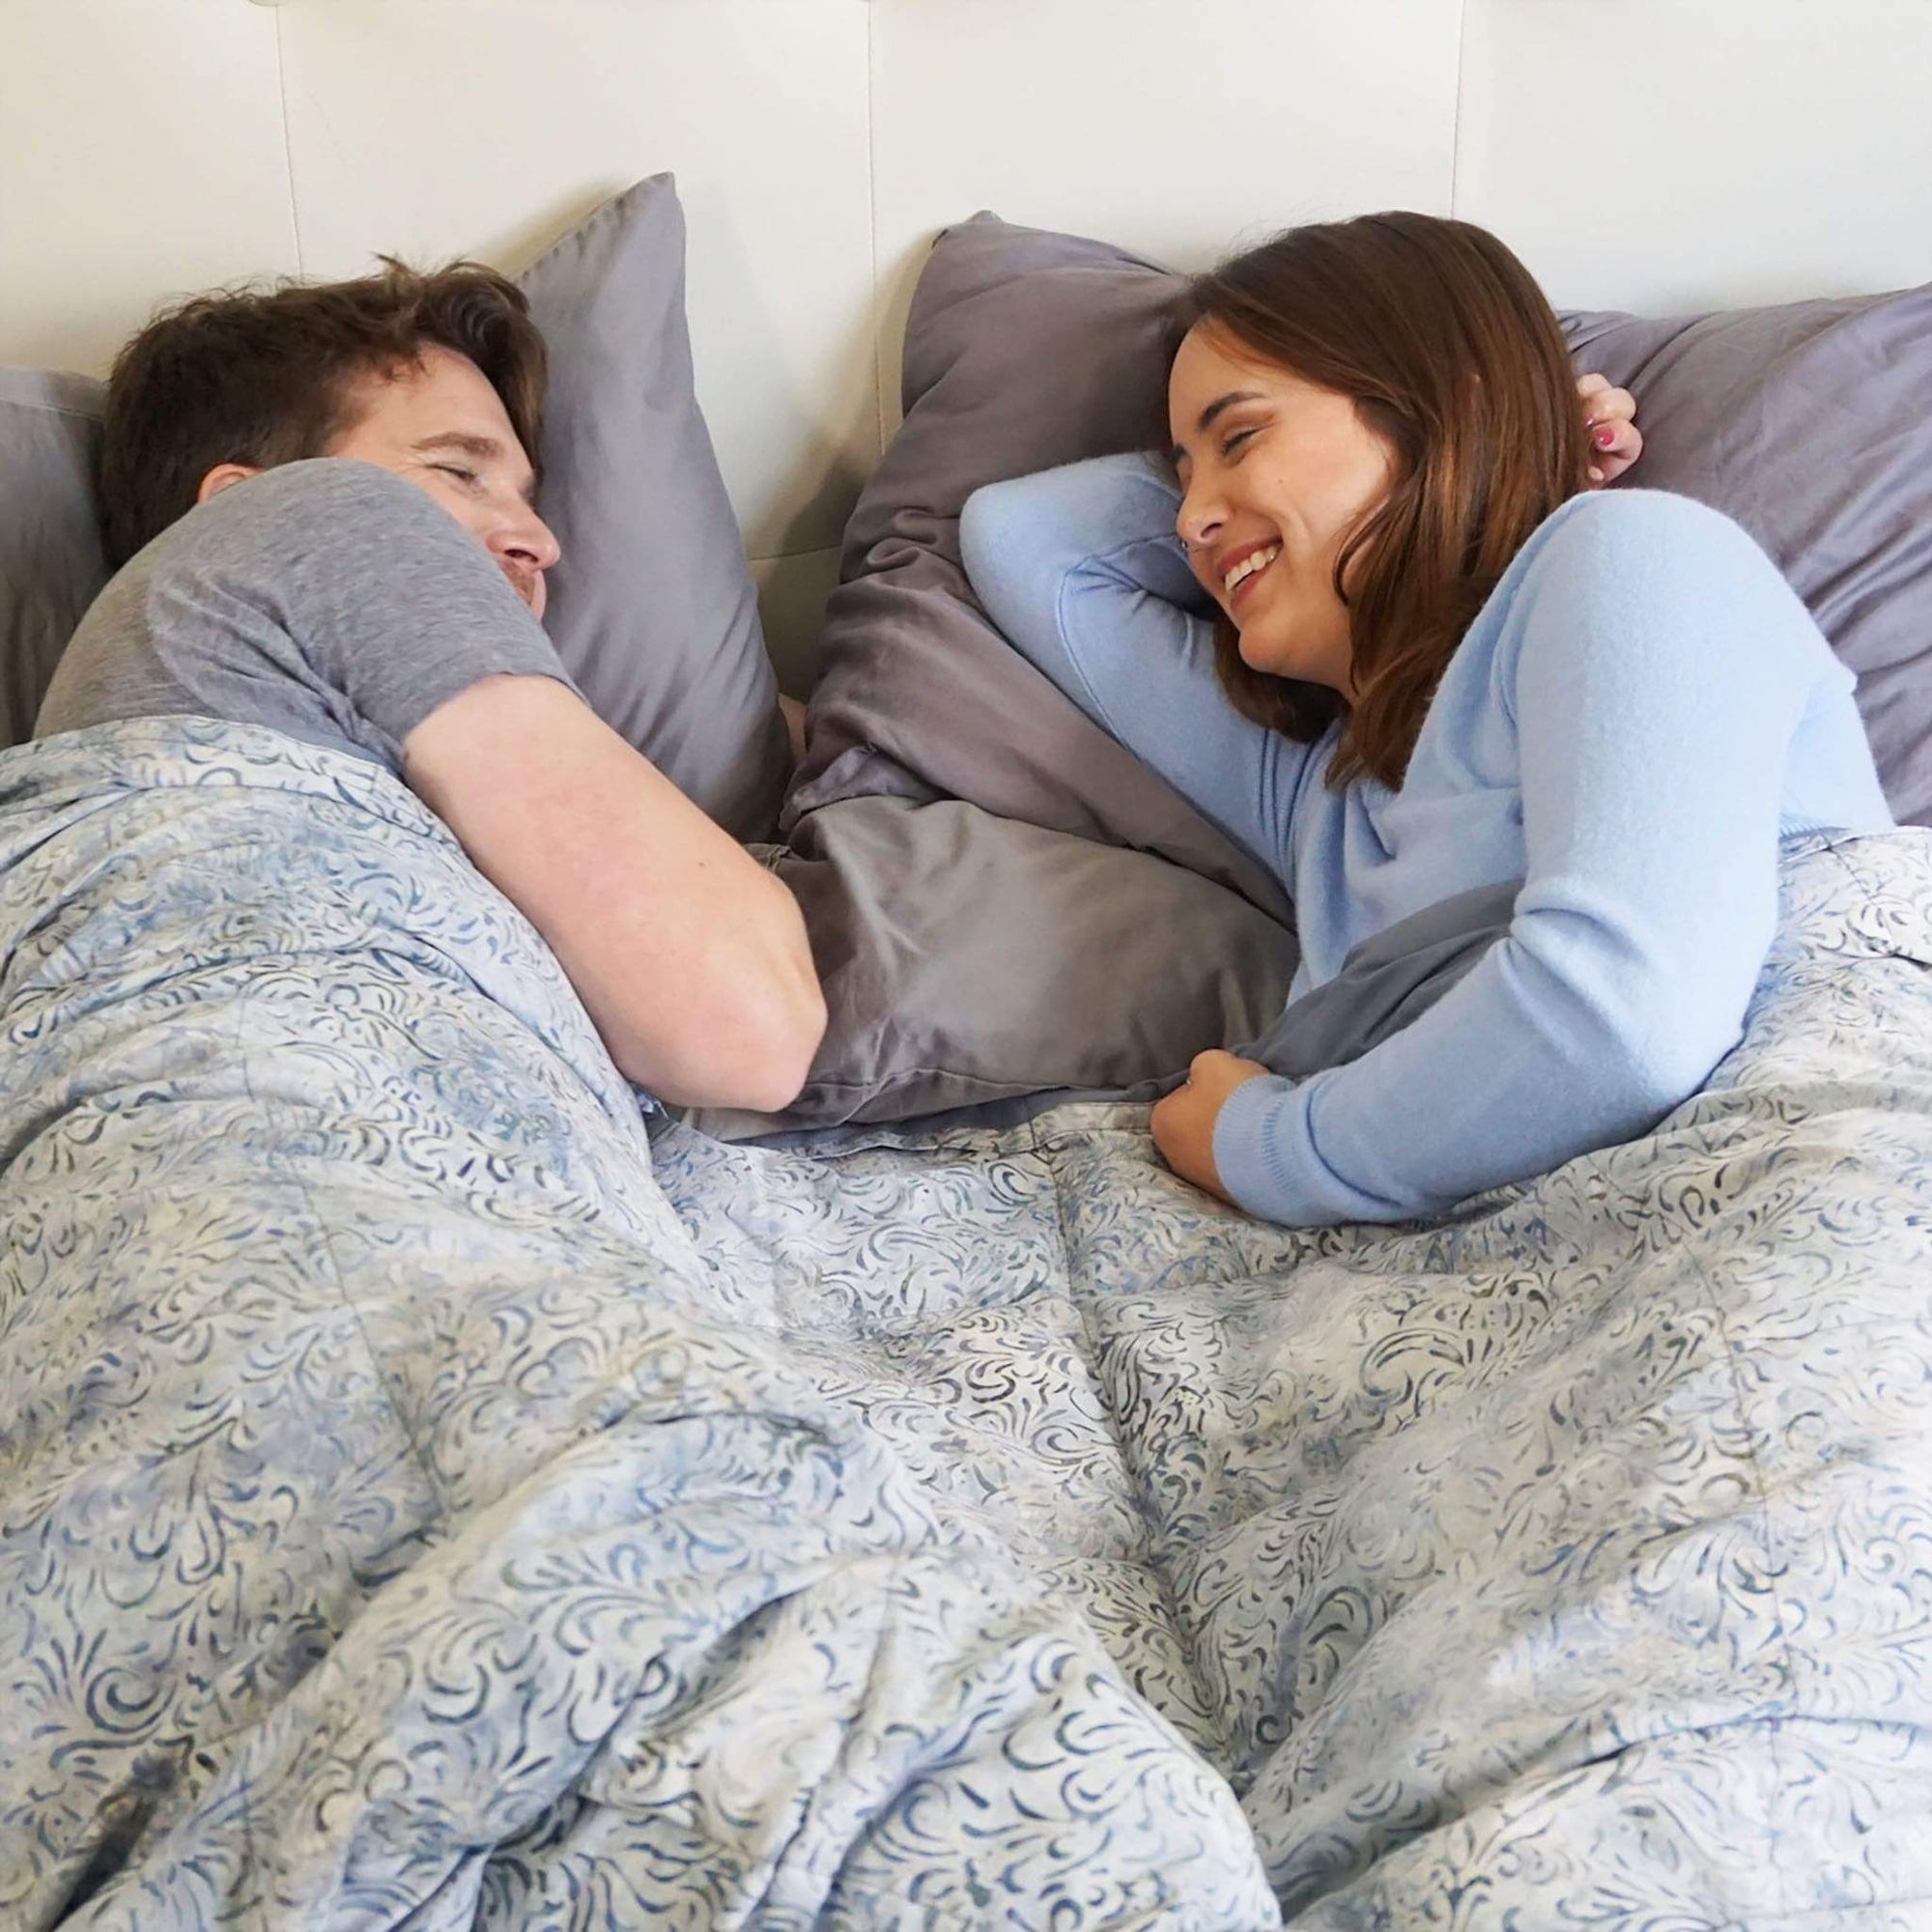 Sleeping With Weighted Blankets Helps Insomnia And Anxiety, Study Finds